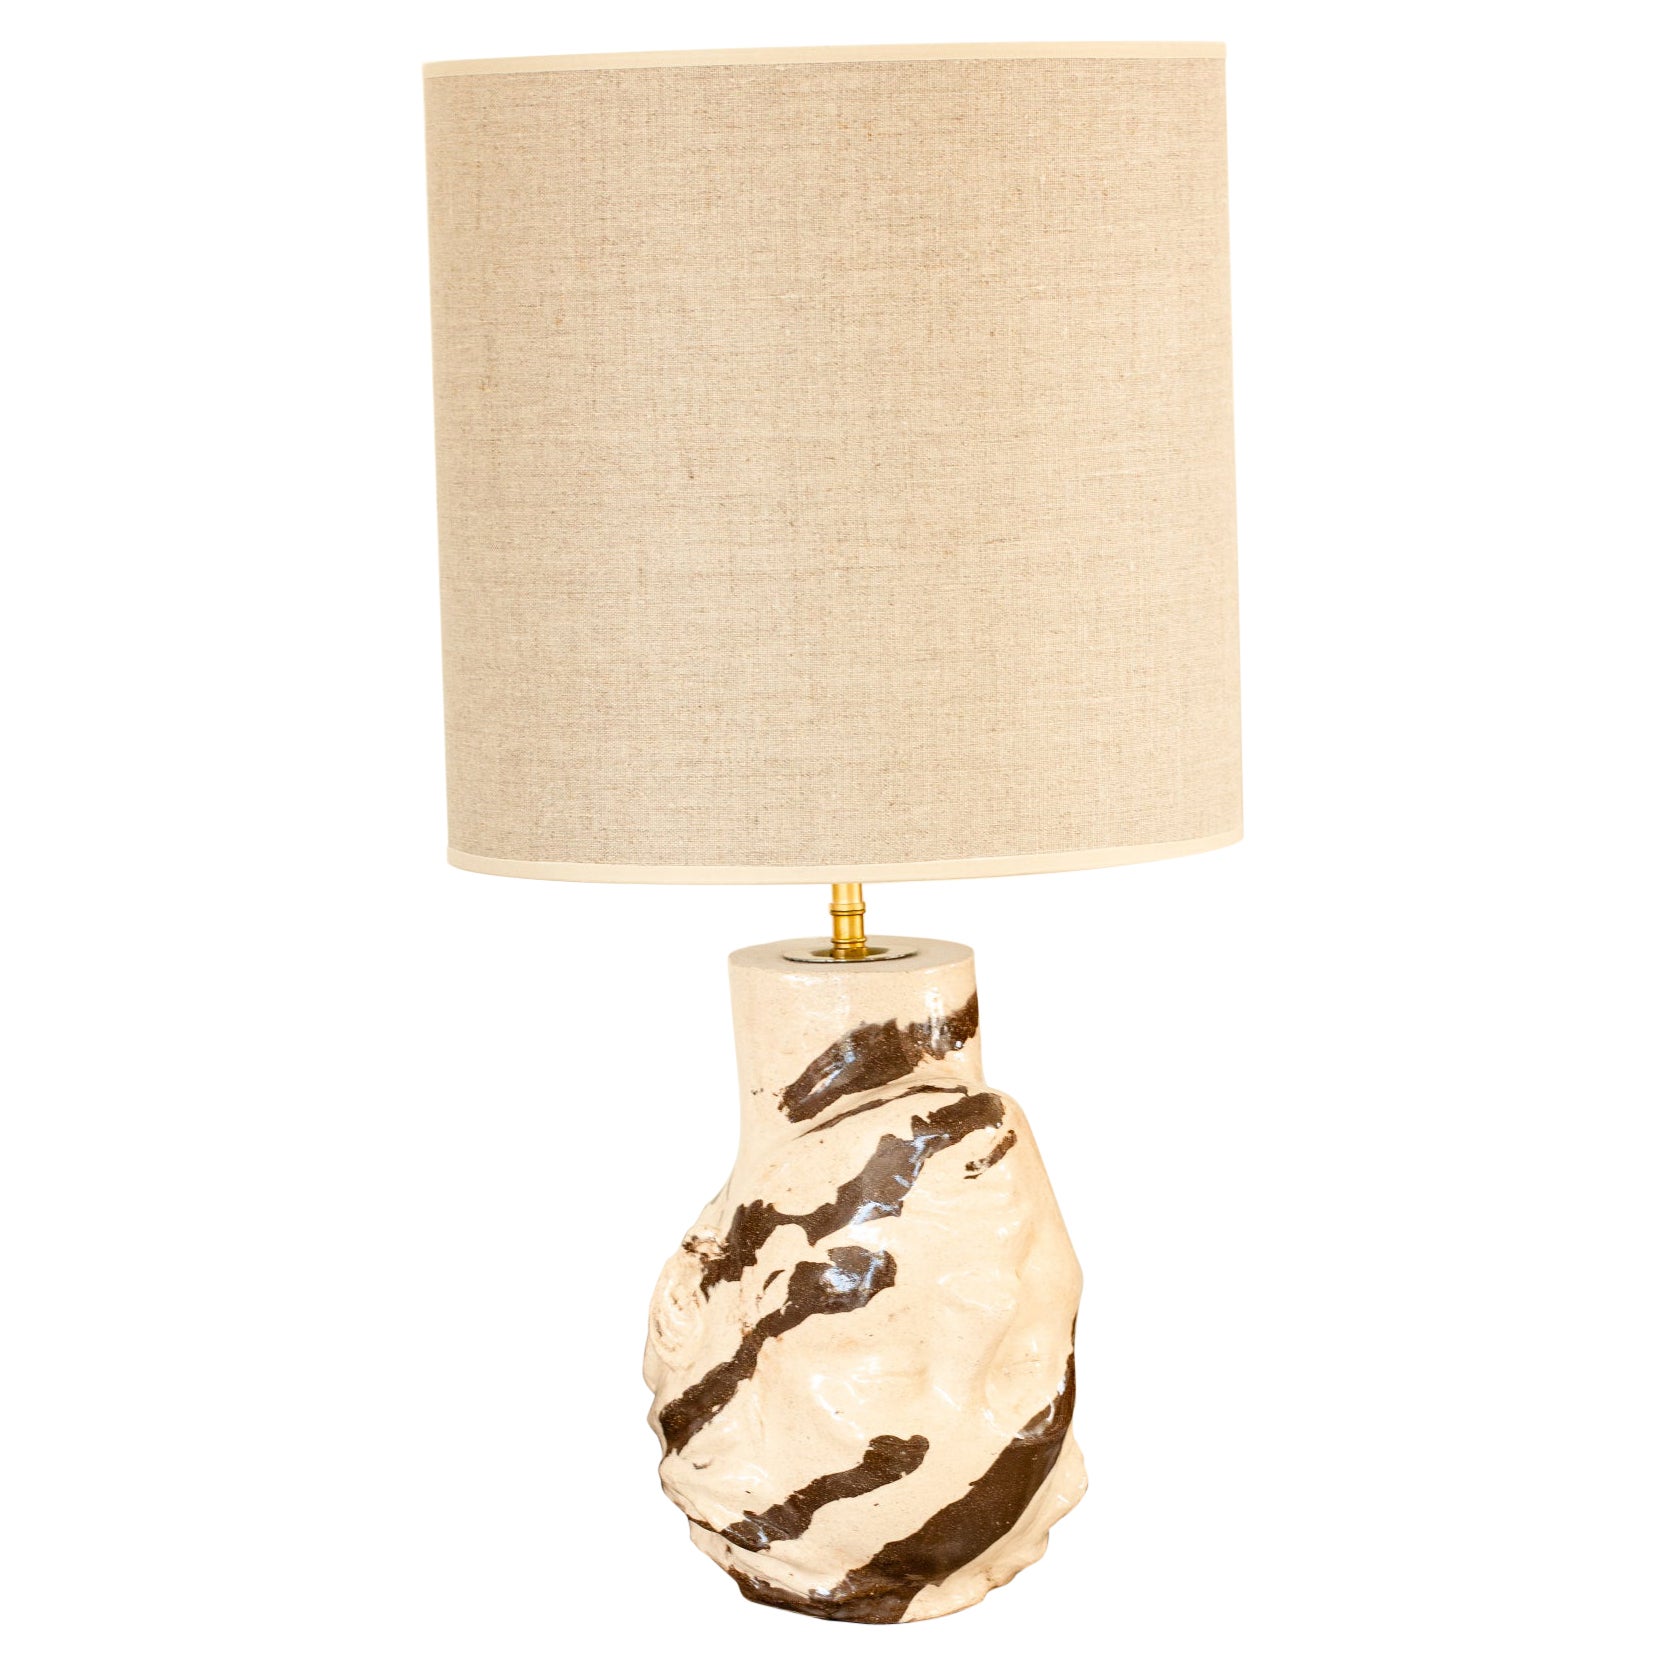 Upside Down Head Table Lamp by Di Fretto For Sale